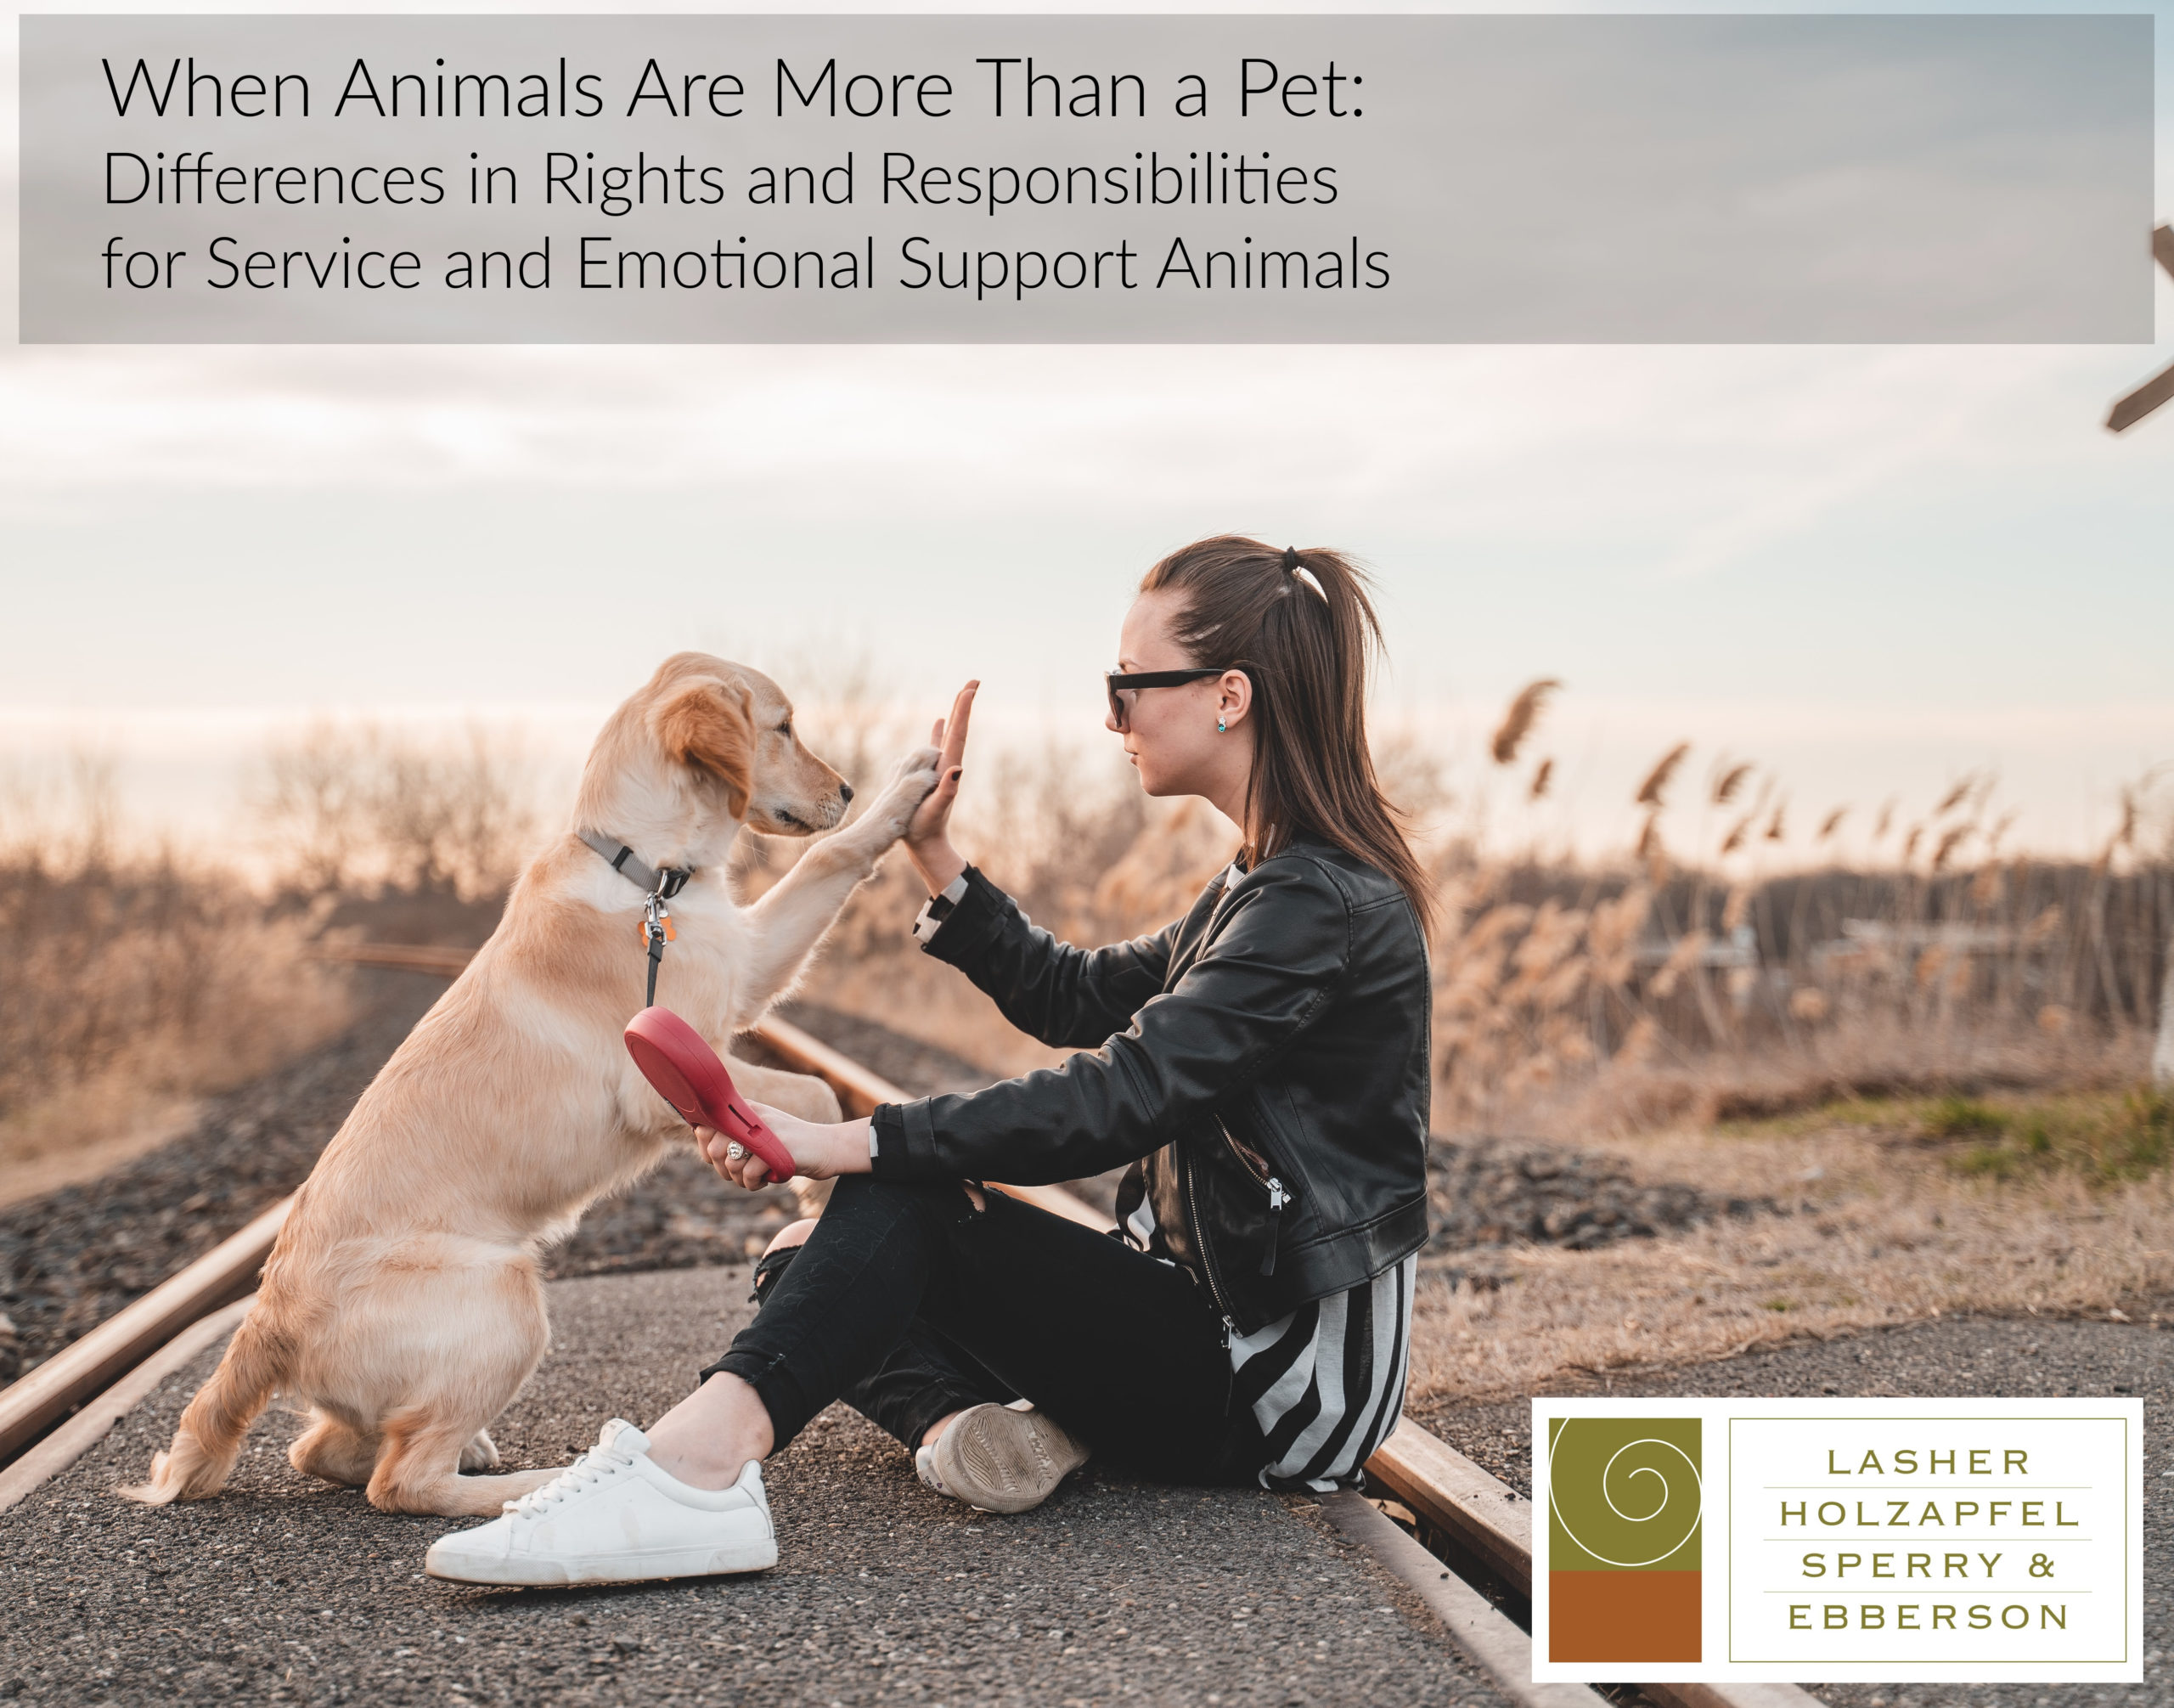 When Animals Are More Than a Pet:  Differences in Rights and Responsibilities for Service and Emotional Support Animals